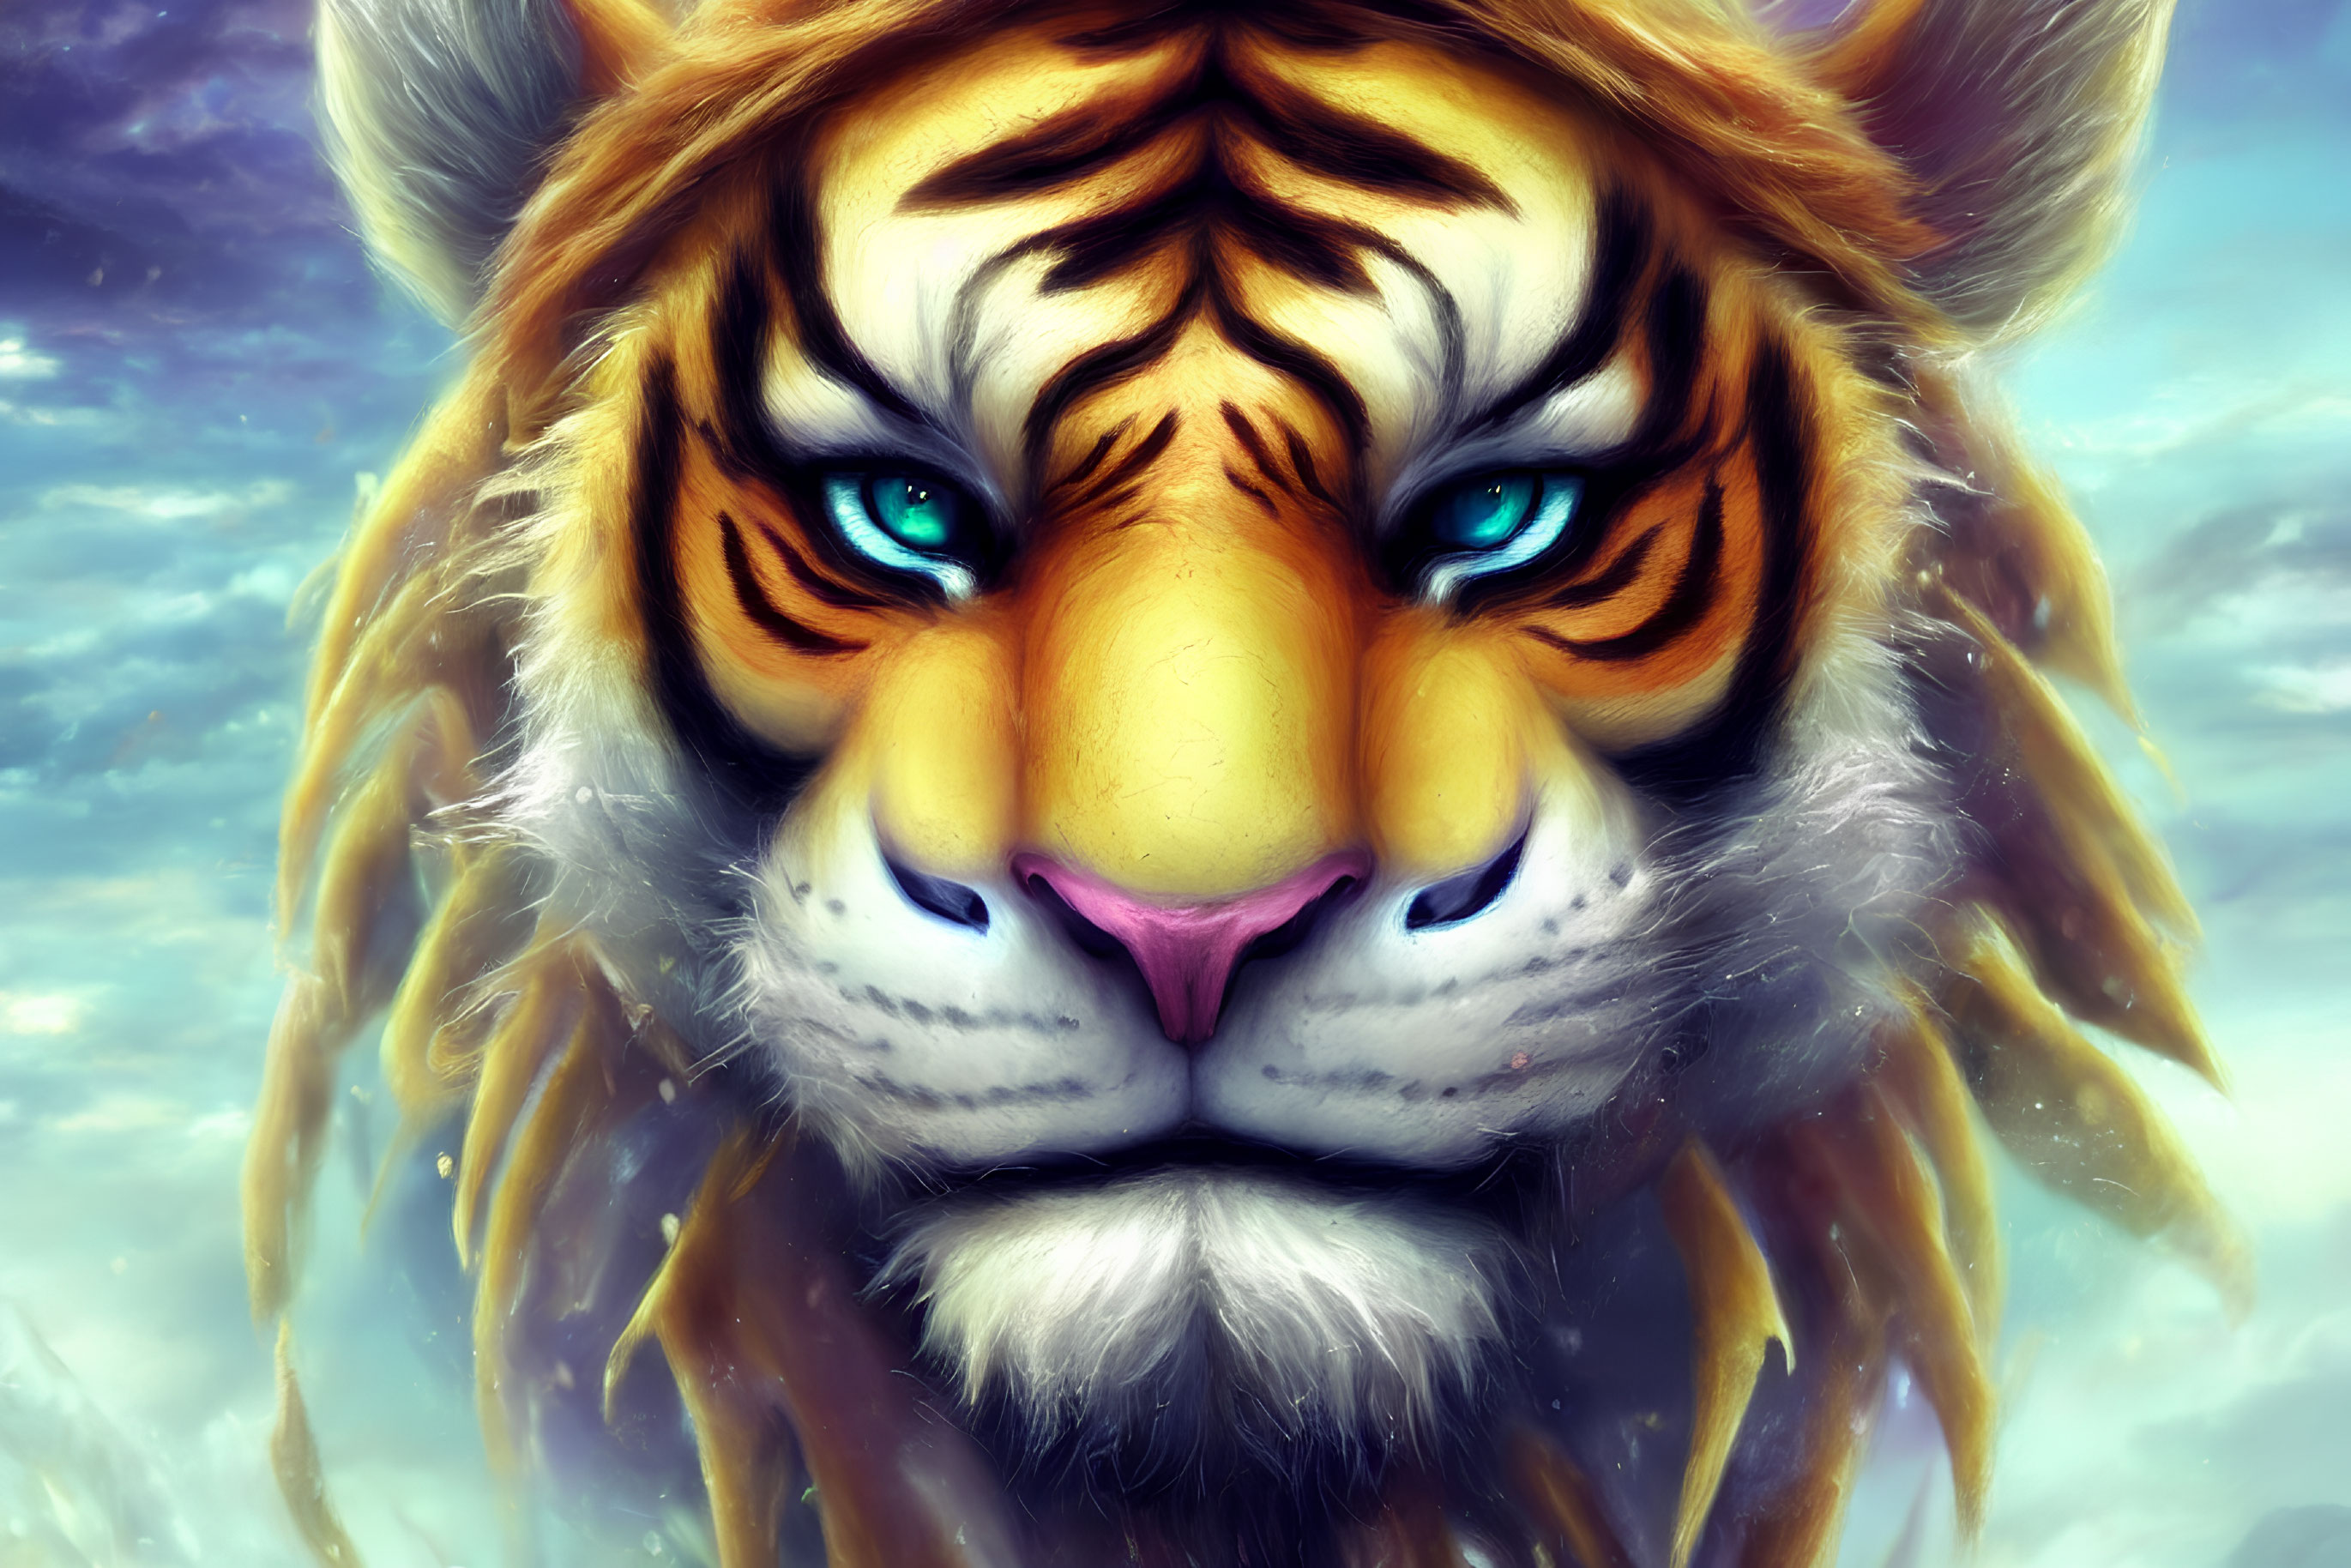 Digital illustration of a tiger with blue eyes and flowing mane in a dreamy sky.